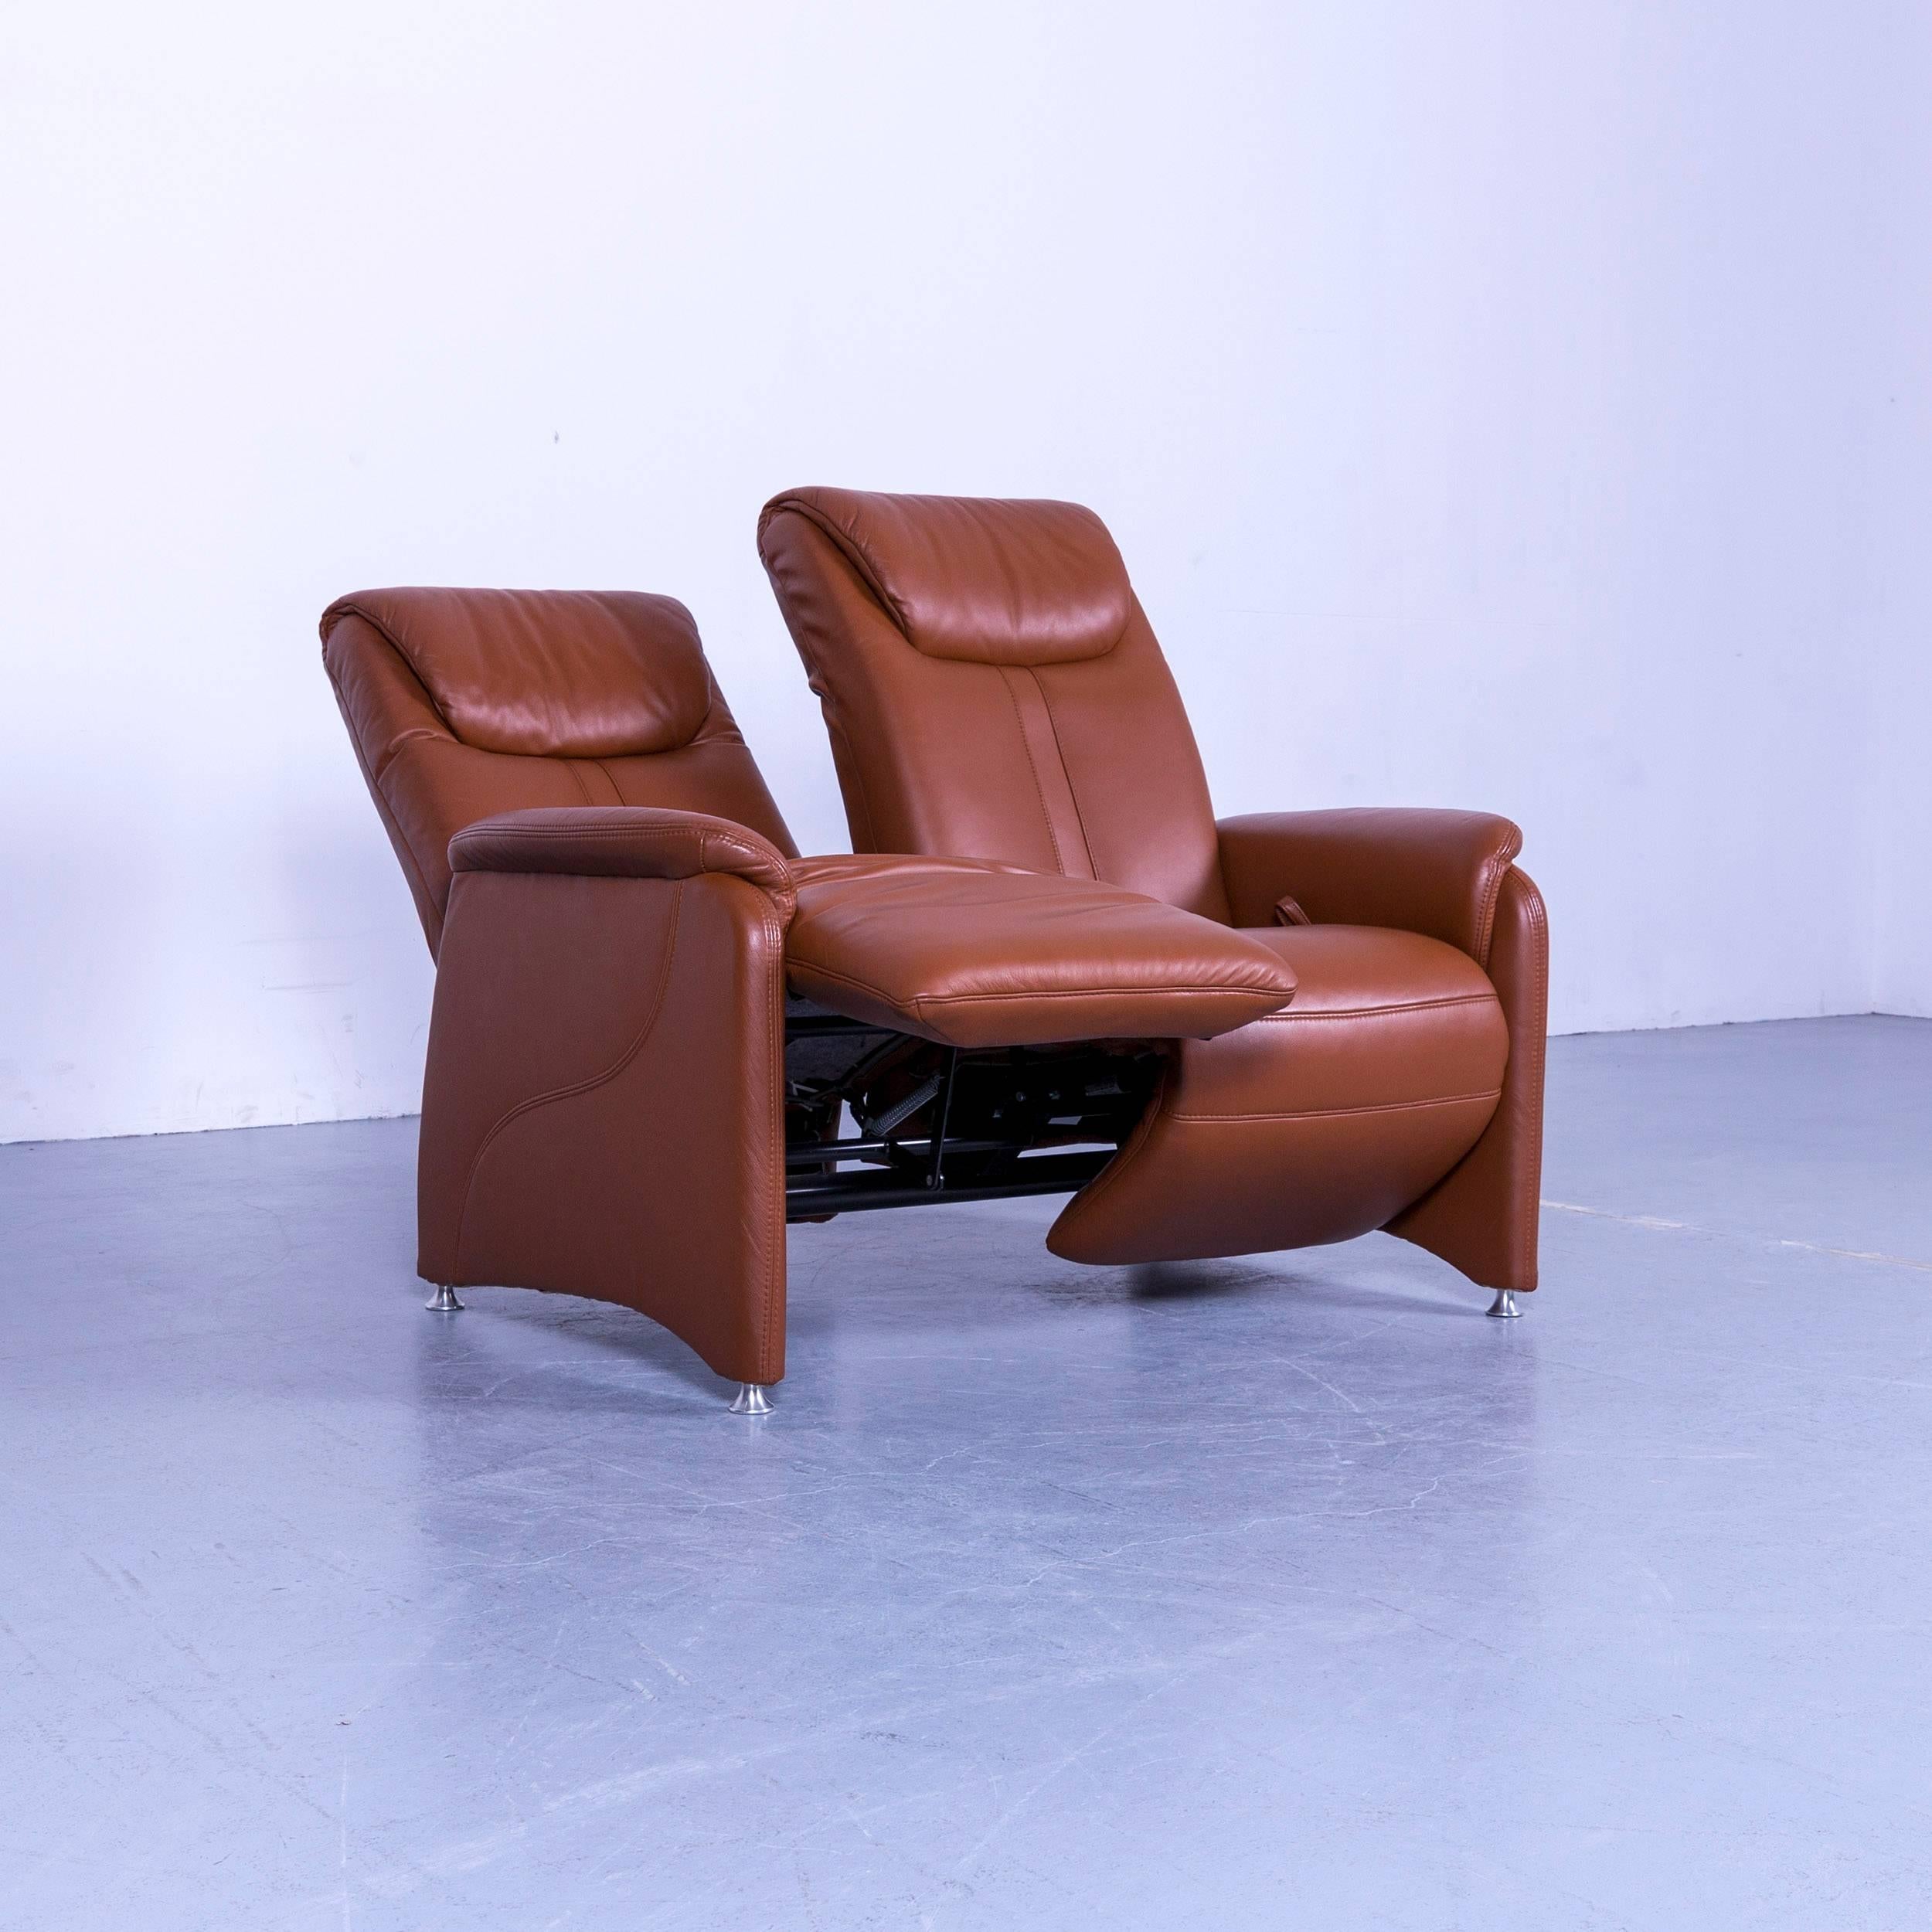 An Willy Schillig designer leather sofa brown two-seat recliner.
















   